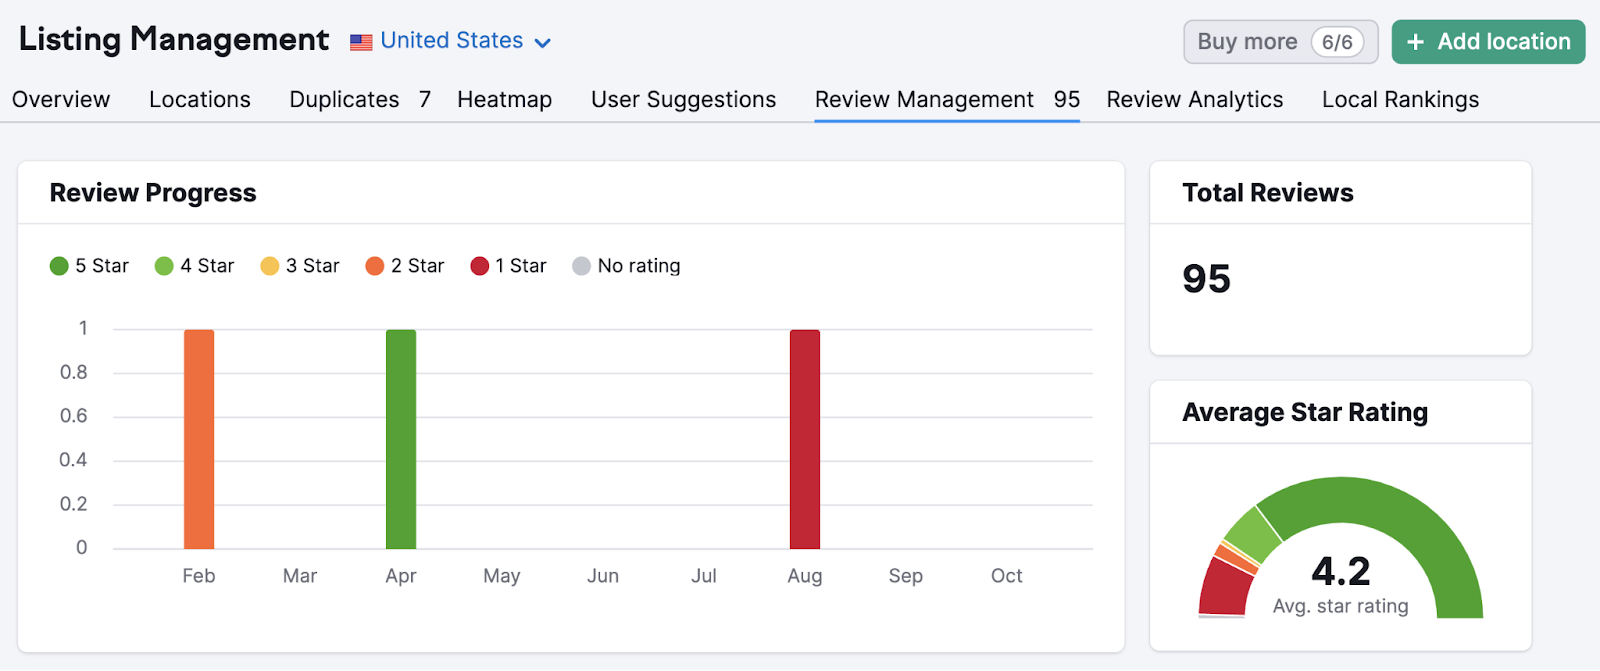 "Review Progress" chart in Review Management tool